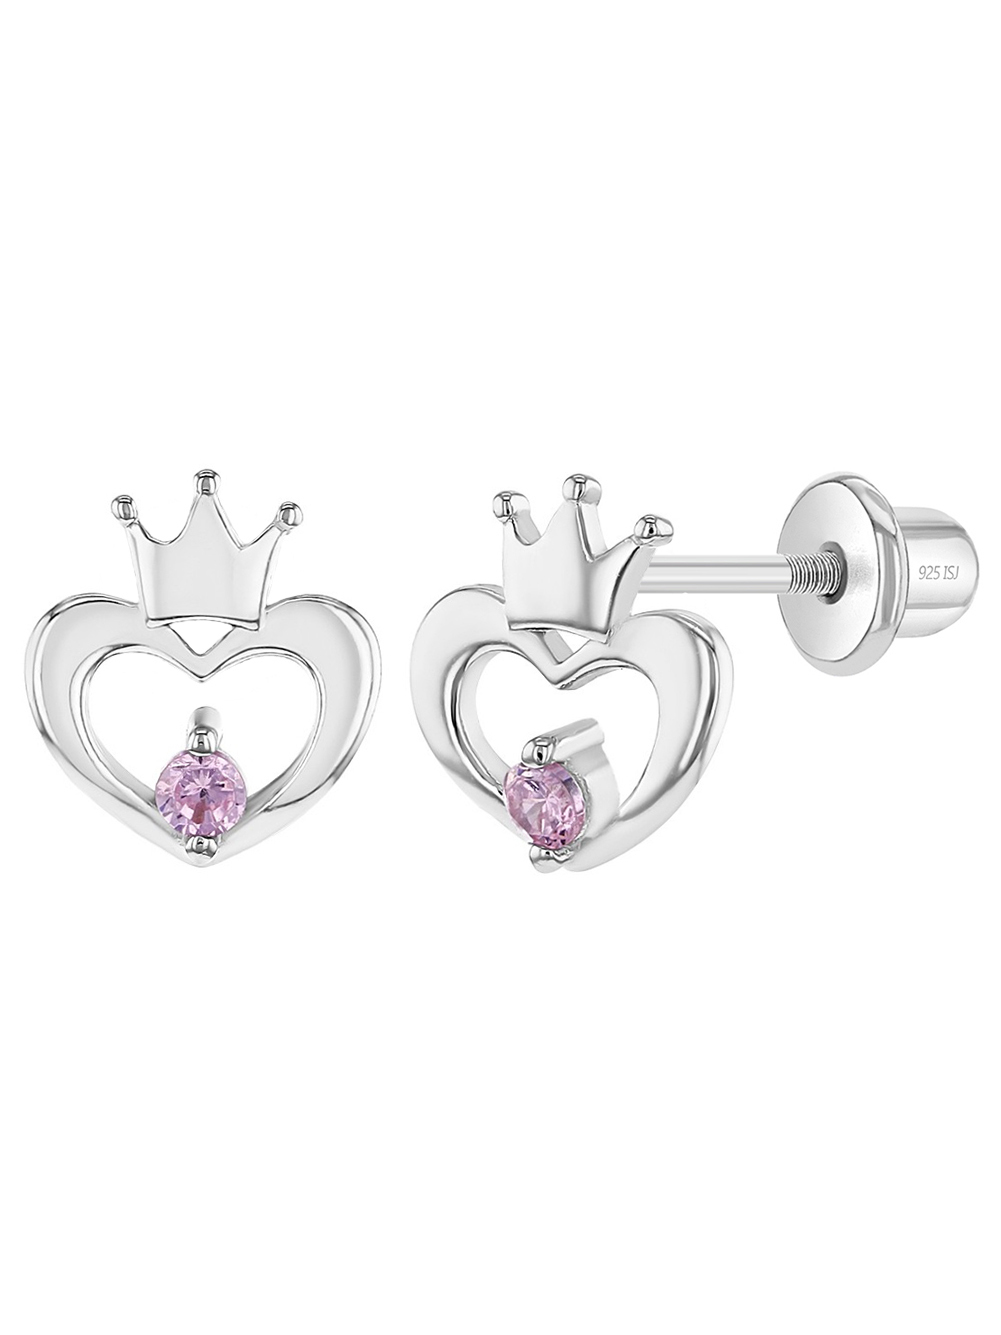 Great Jewelry for Everyday Wear Sparkling and Adorable Heart Earrings for Young Girls 925 Sterling Silver Toddlers & Girls Heart Cubic Zirconia Safety Screw Back Earrings 4mm